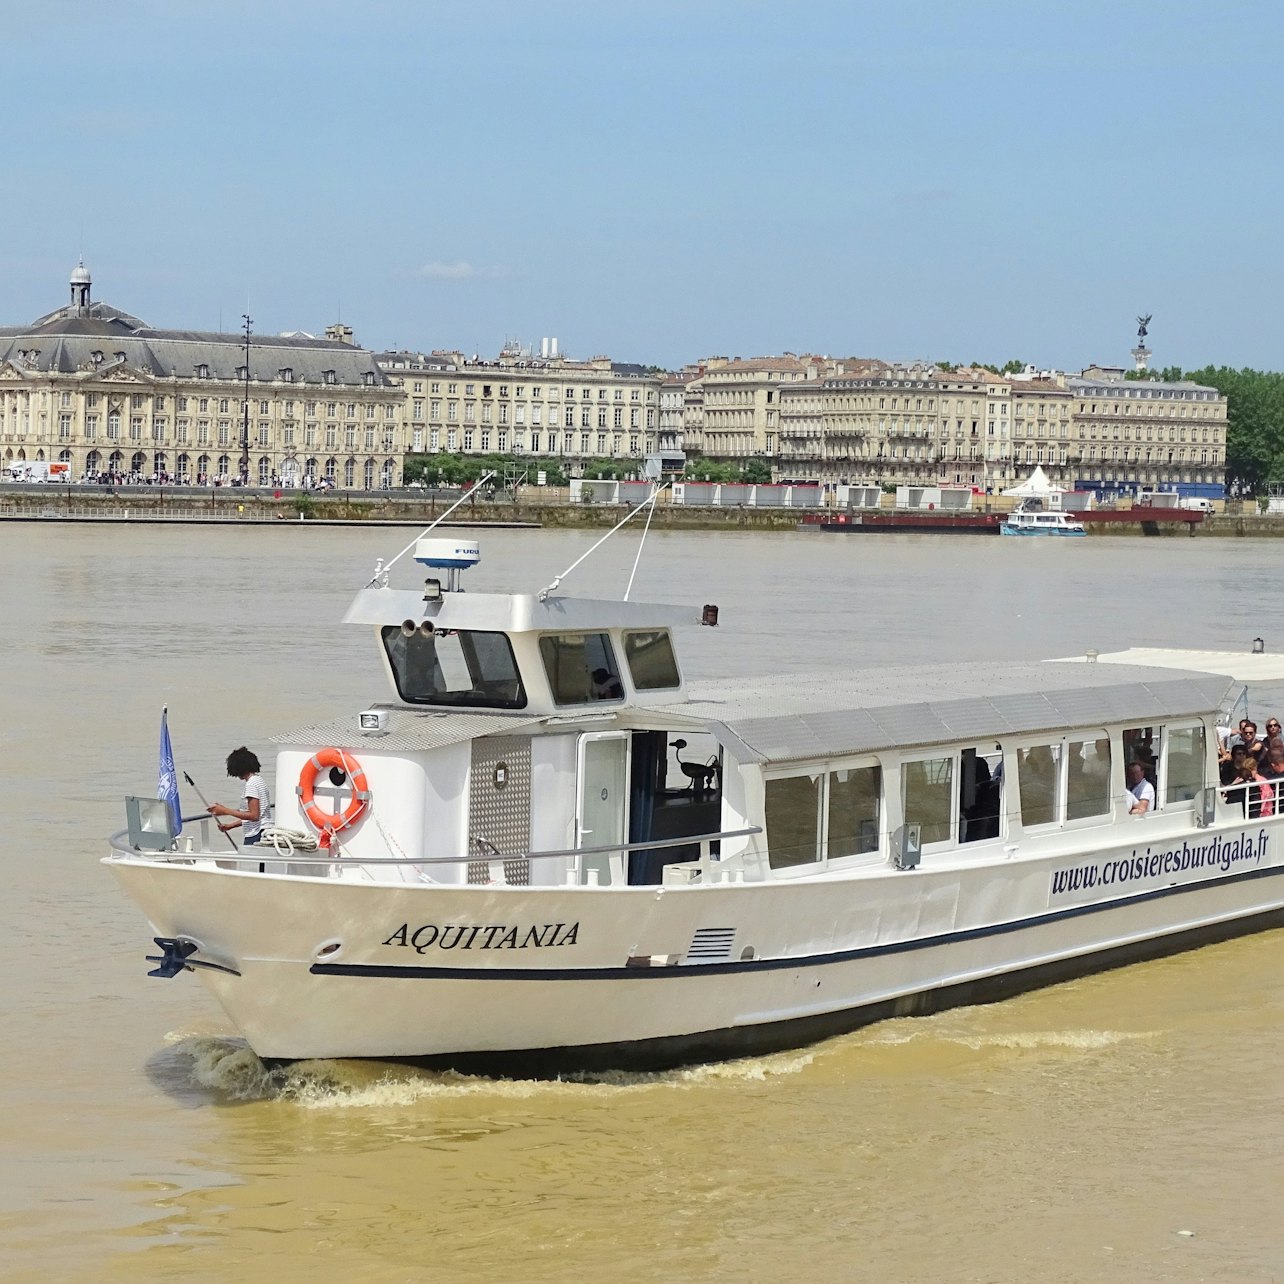 Bordeaux Along the Water - Accommodations in Bordeaux